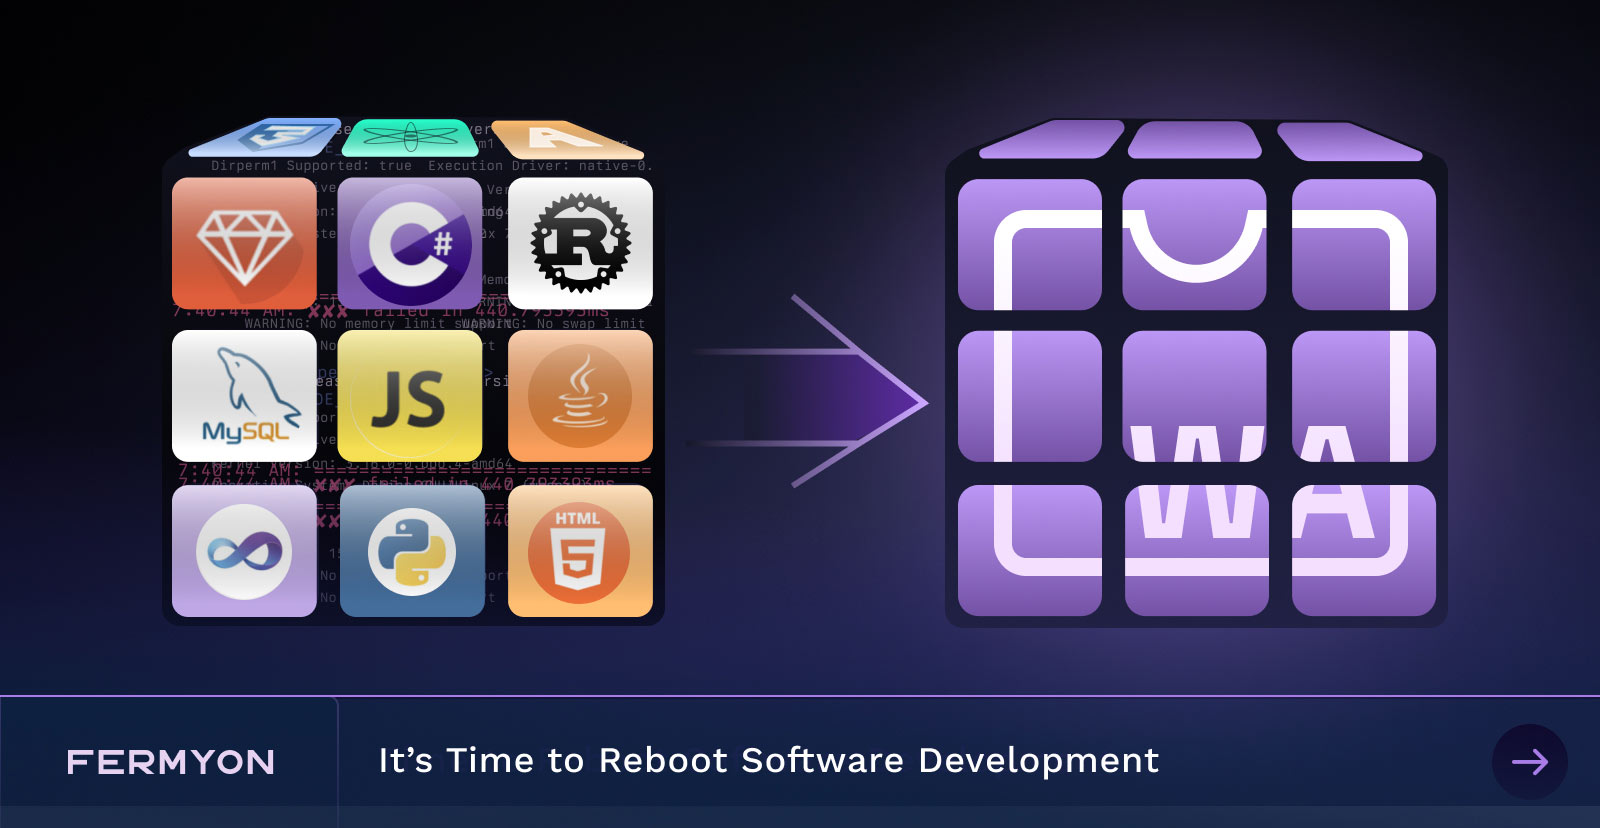 It’s Time to Reboot Software Development